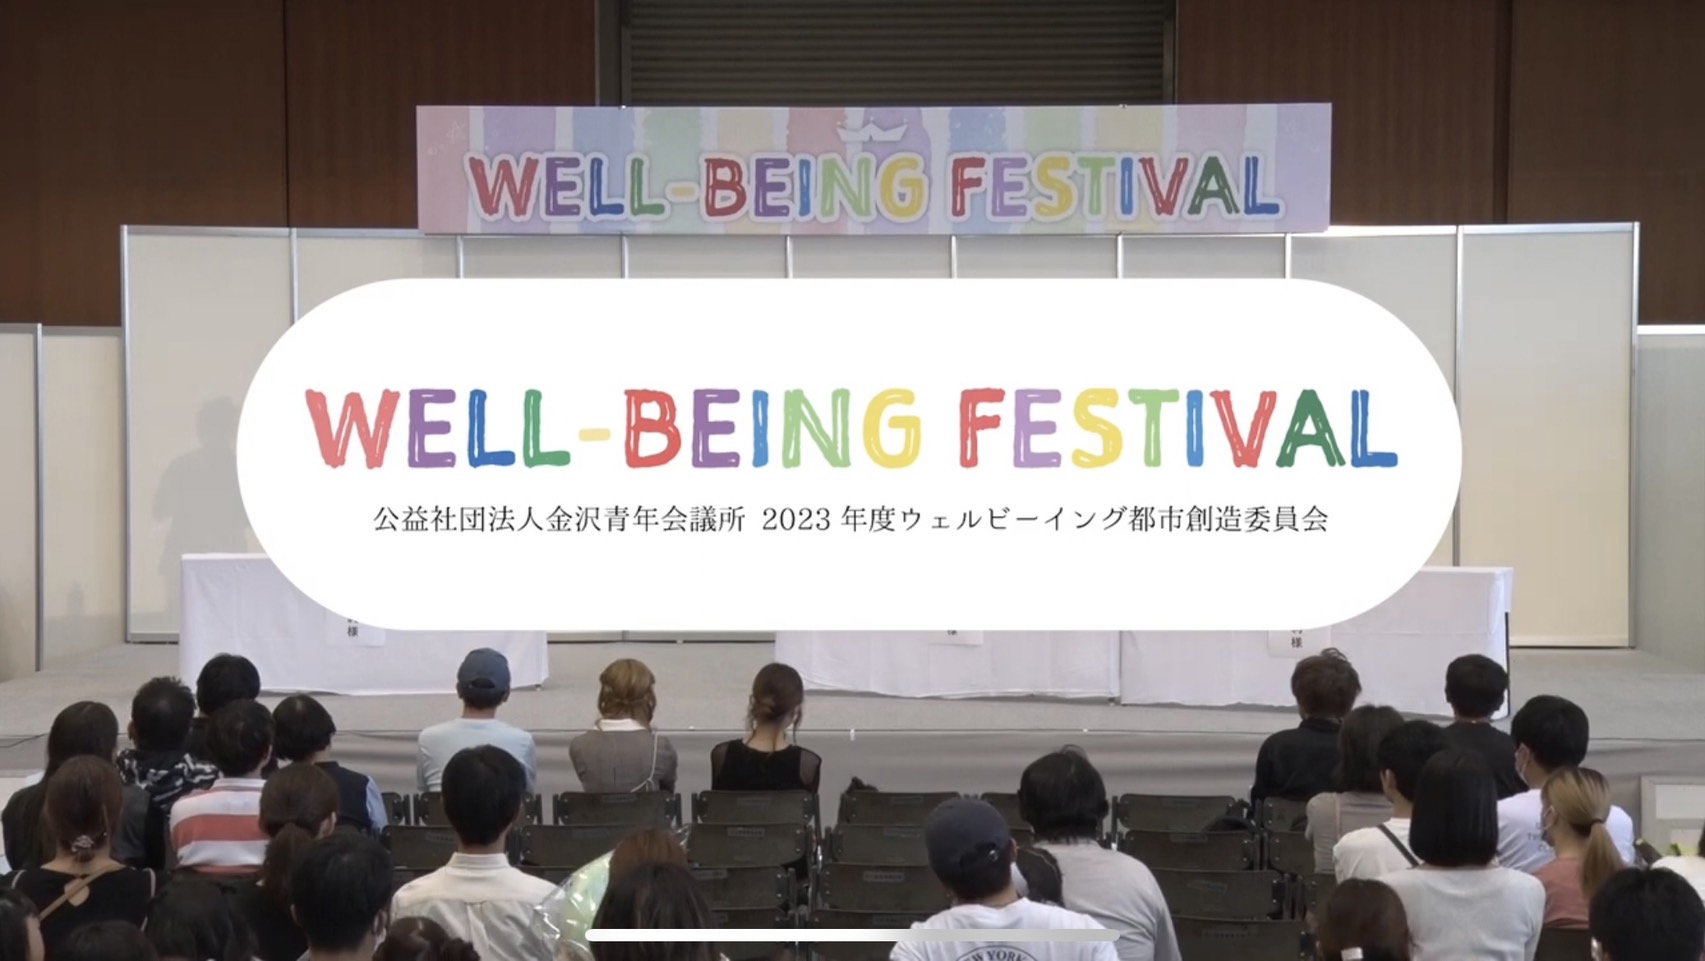 WELL-BEING FESTIVAL